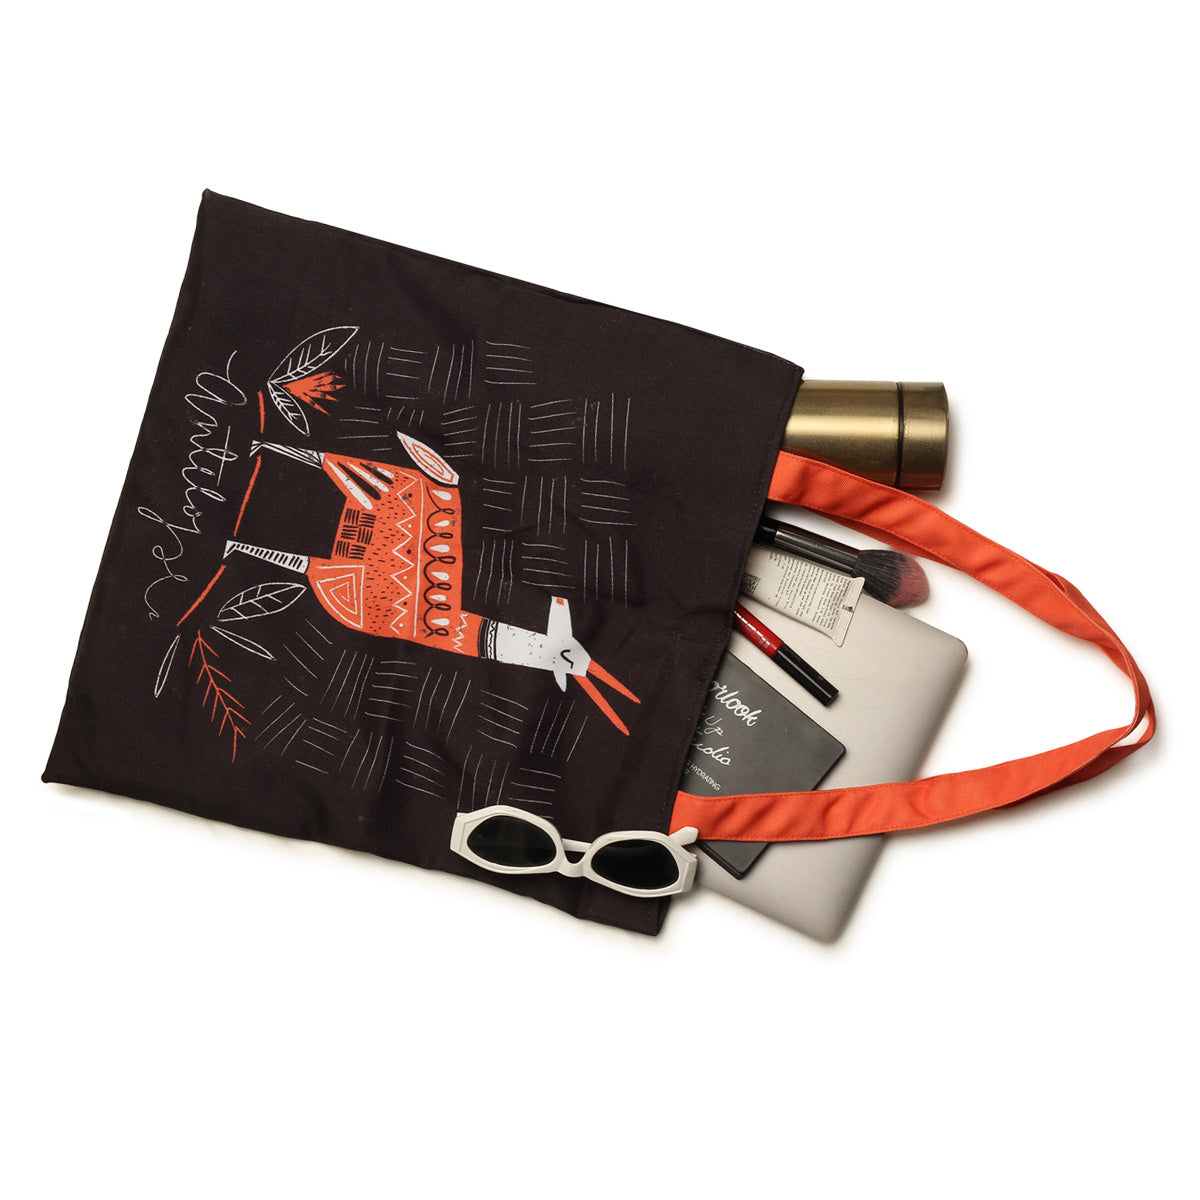 A black tote bag with a red and white tribal deer design, an orange strap, and various items inside including a gold water bottle, sunglasses, a notebook, and makeup brushes.